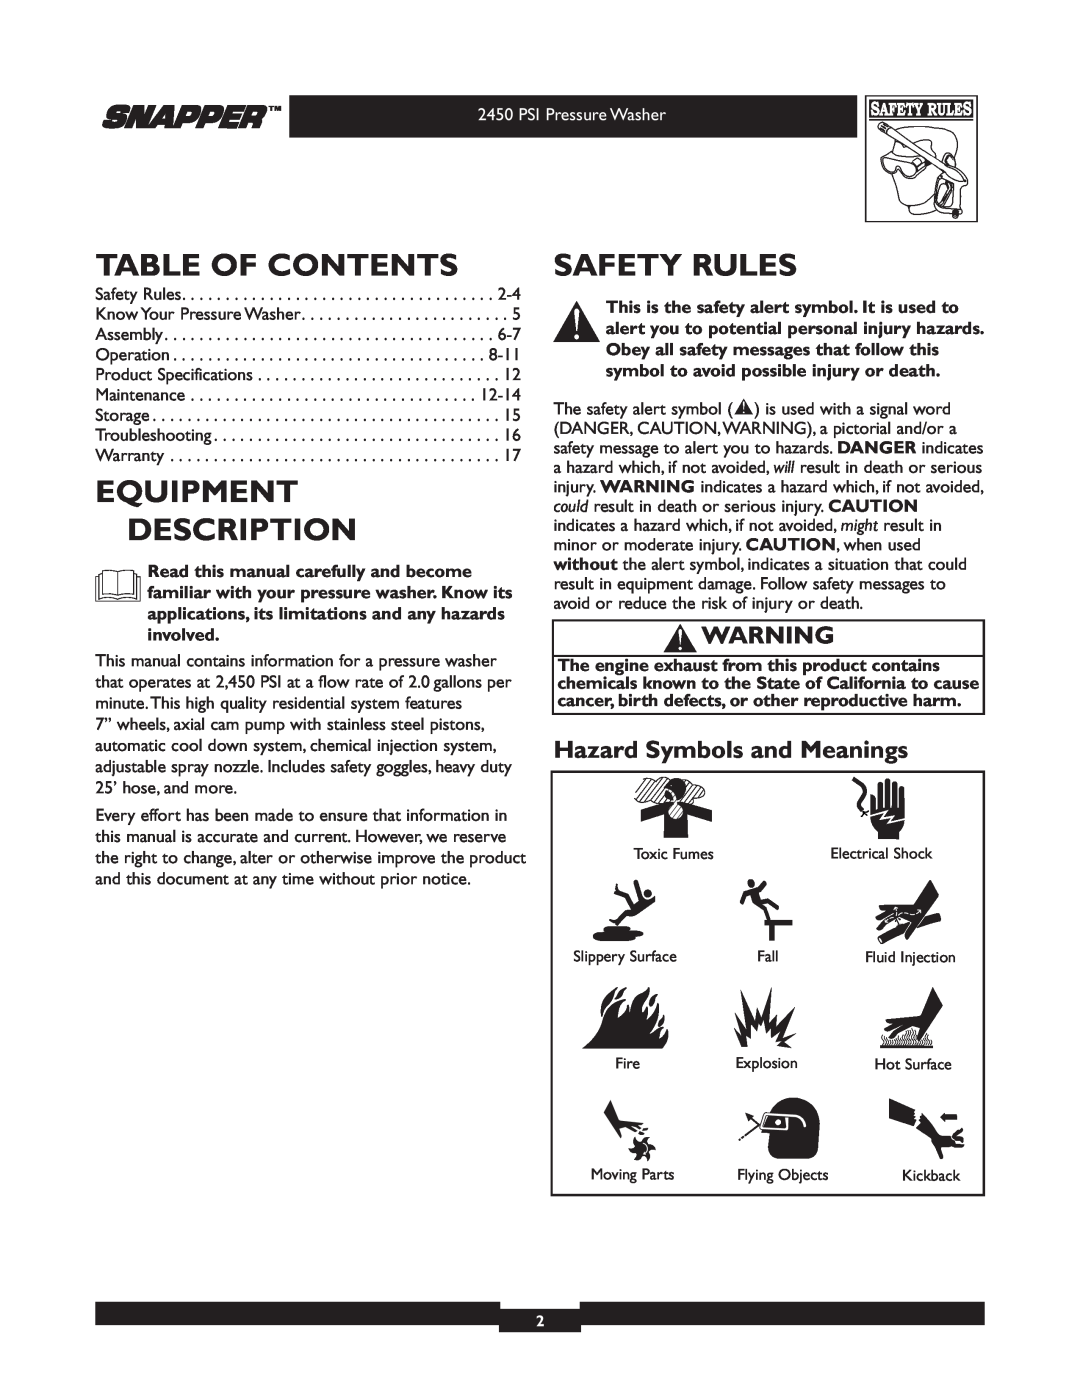 Snapper 020229 Table Of Contents, Equipment Description, Safety Rules, Hazard Symbols and Meanings, PSI Pressure Washer 